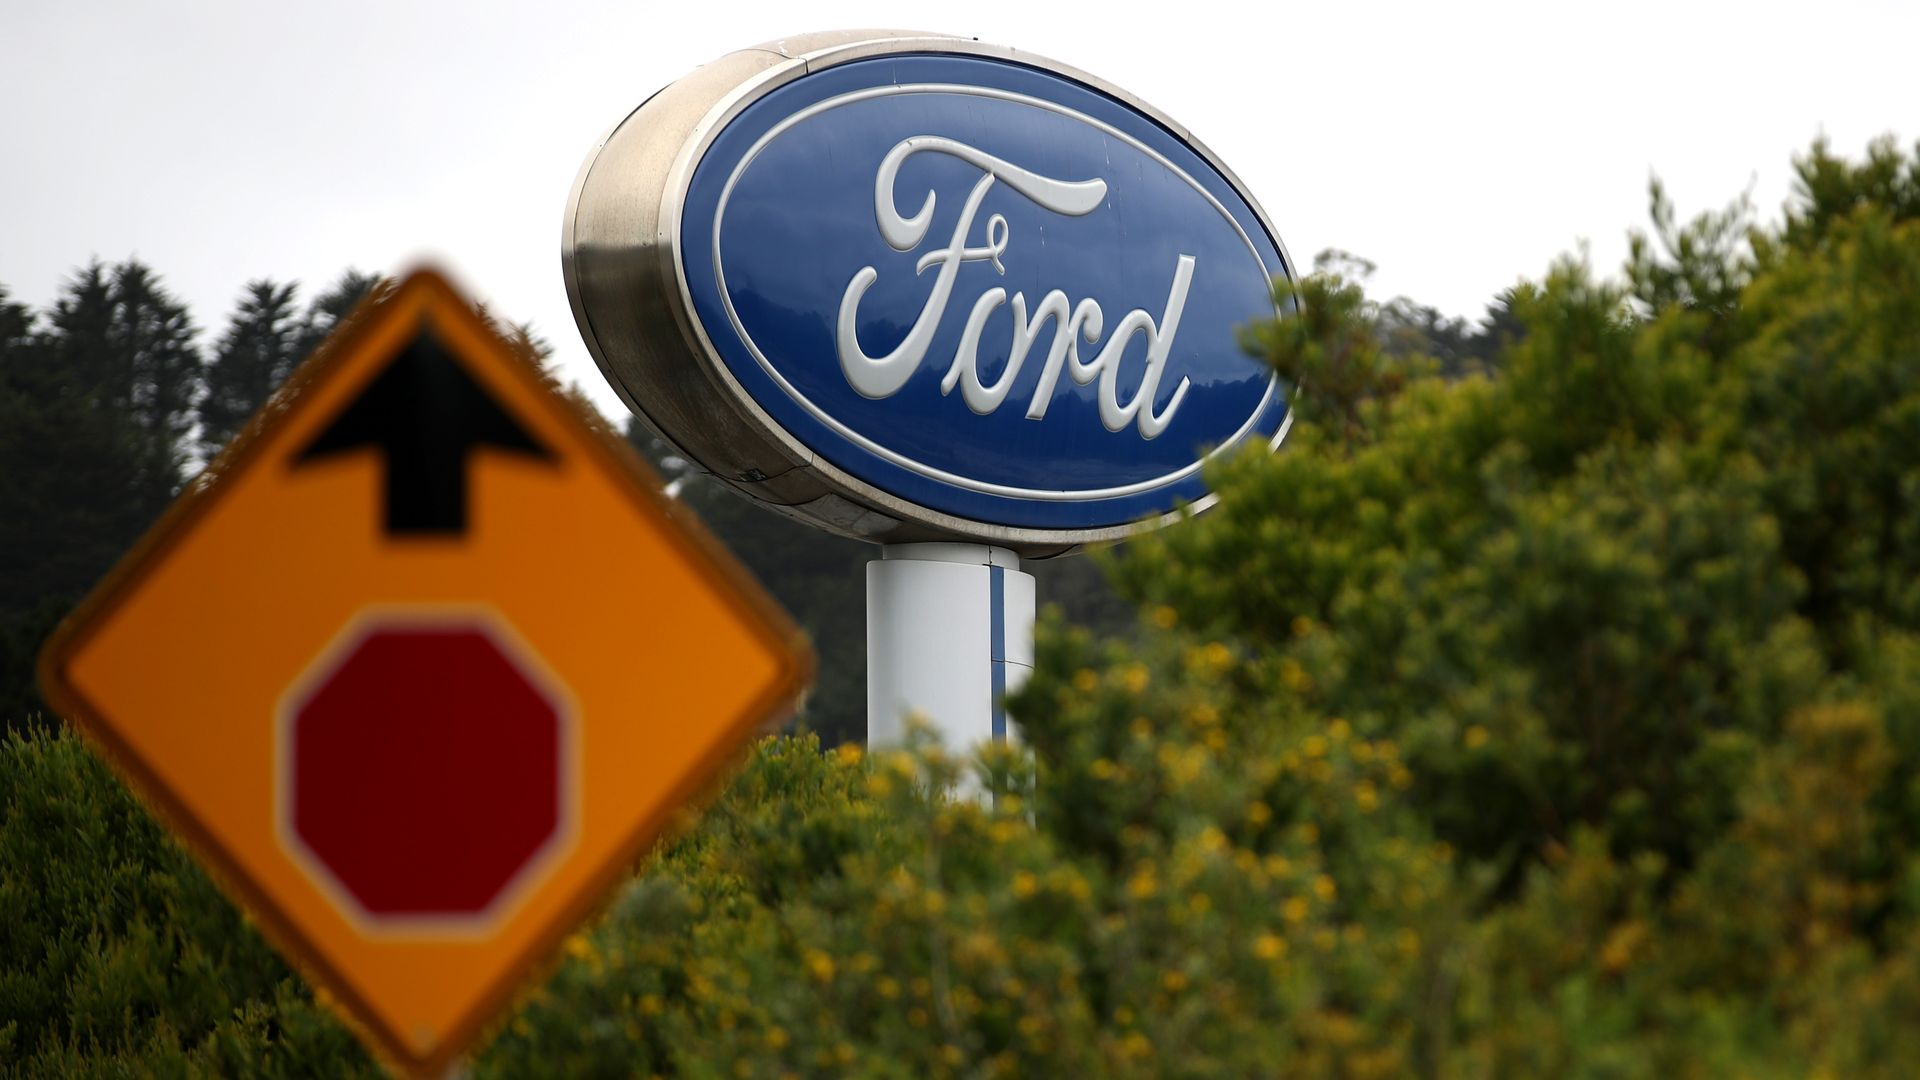 The Ford logo on a sign